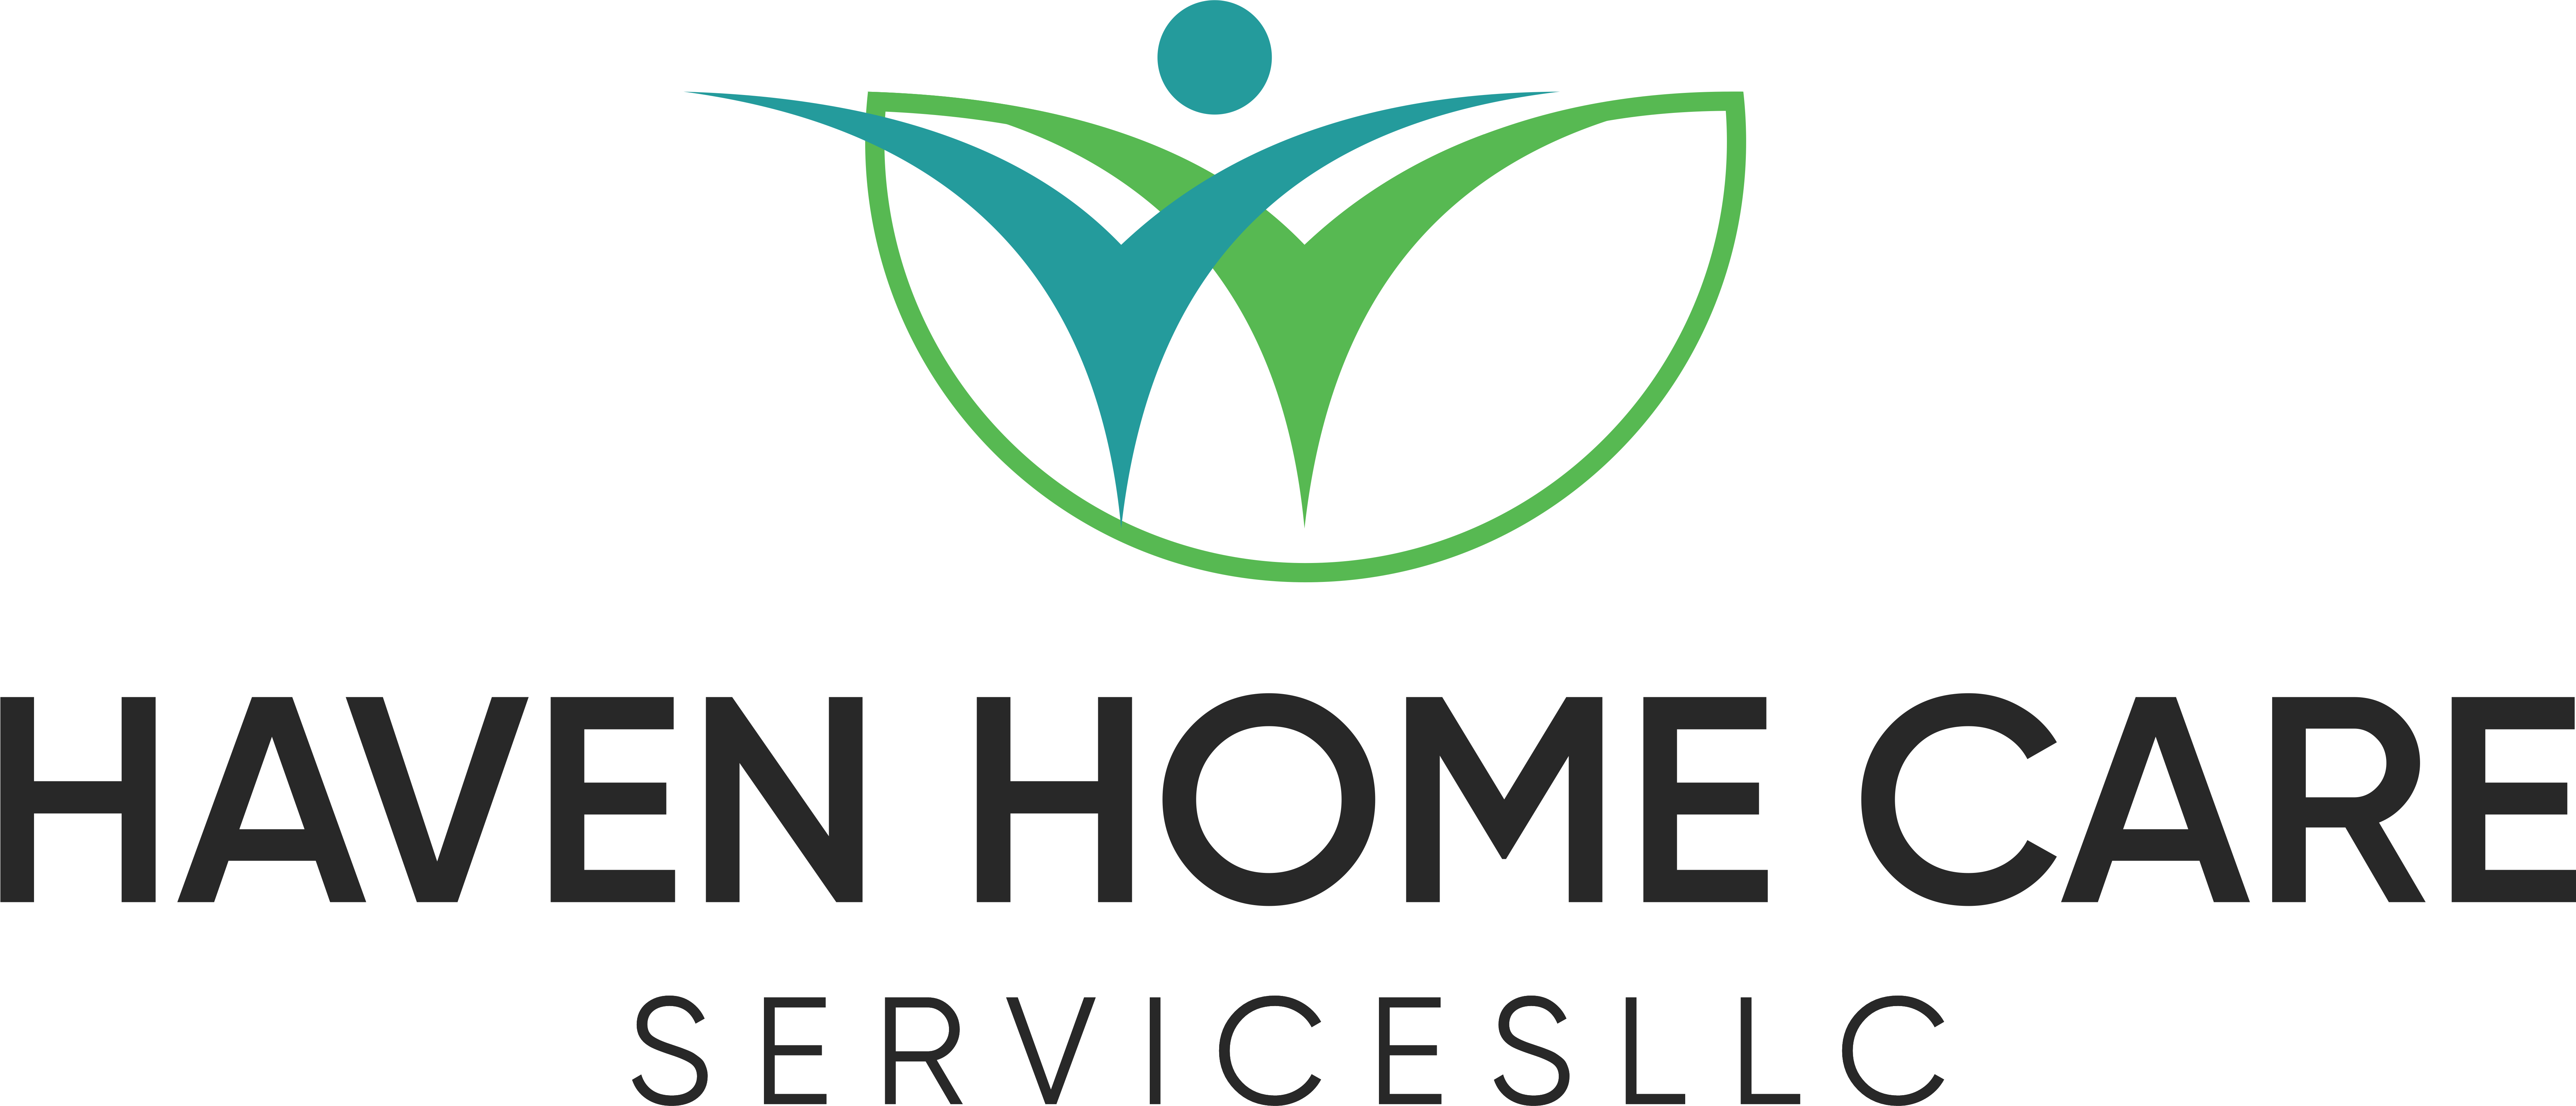 Haven Home Care Services LLC